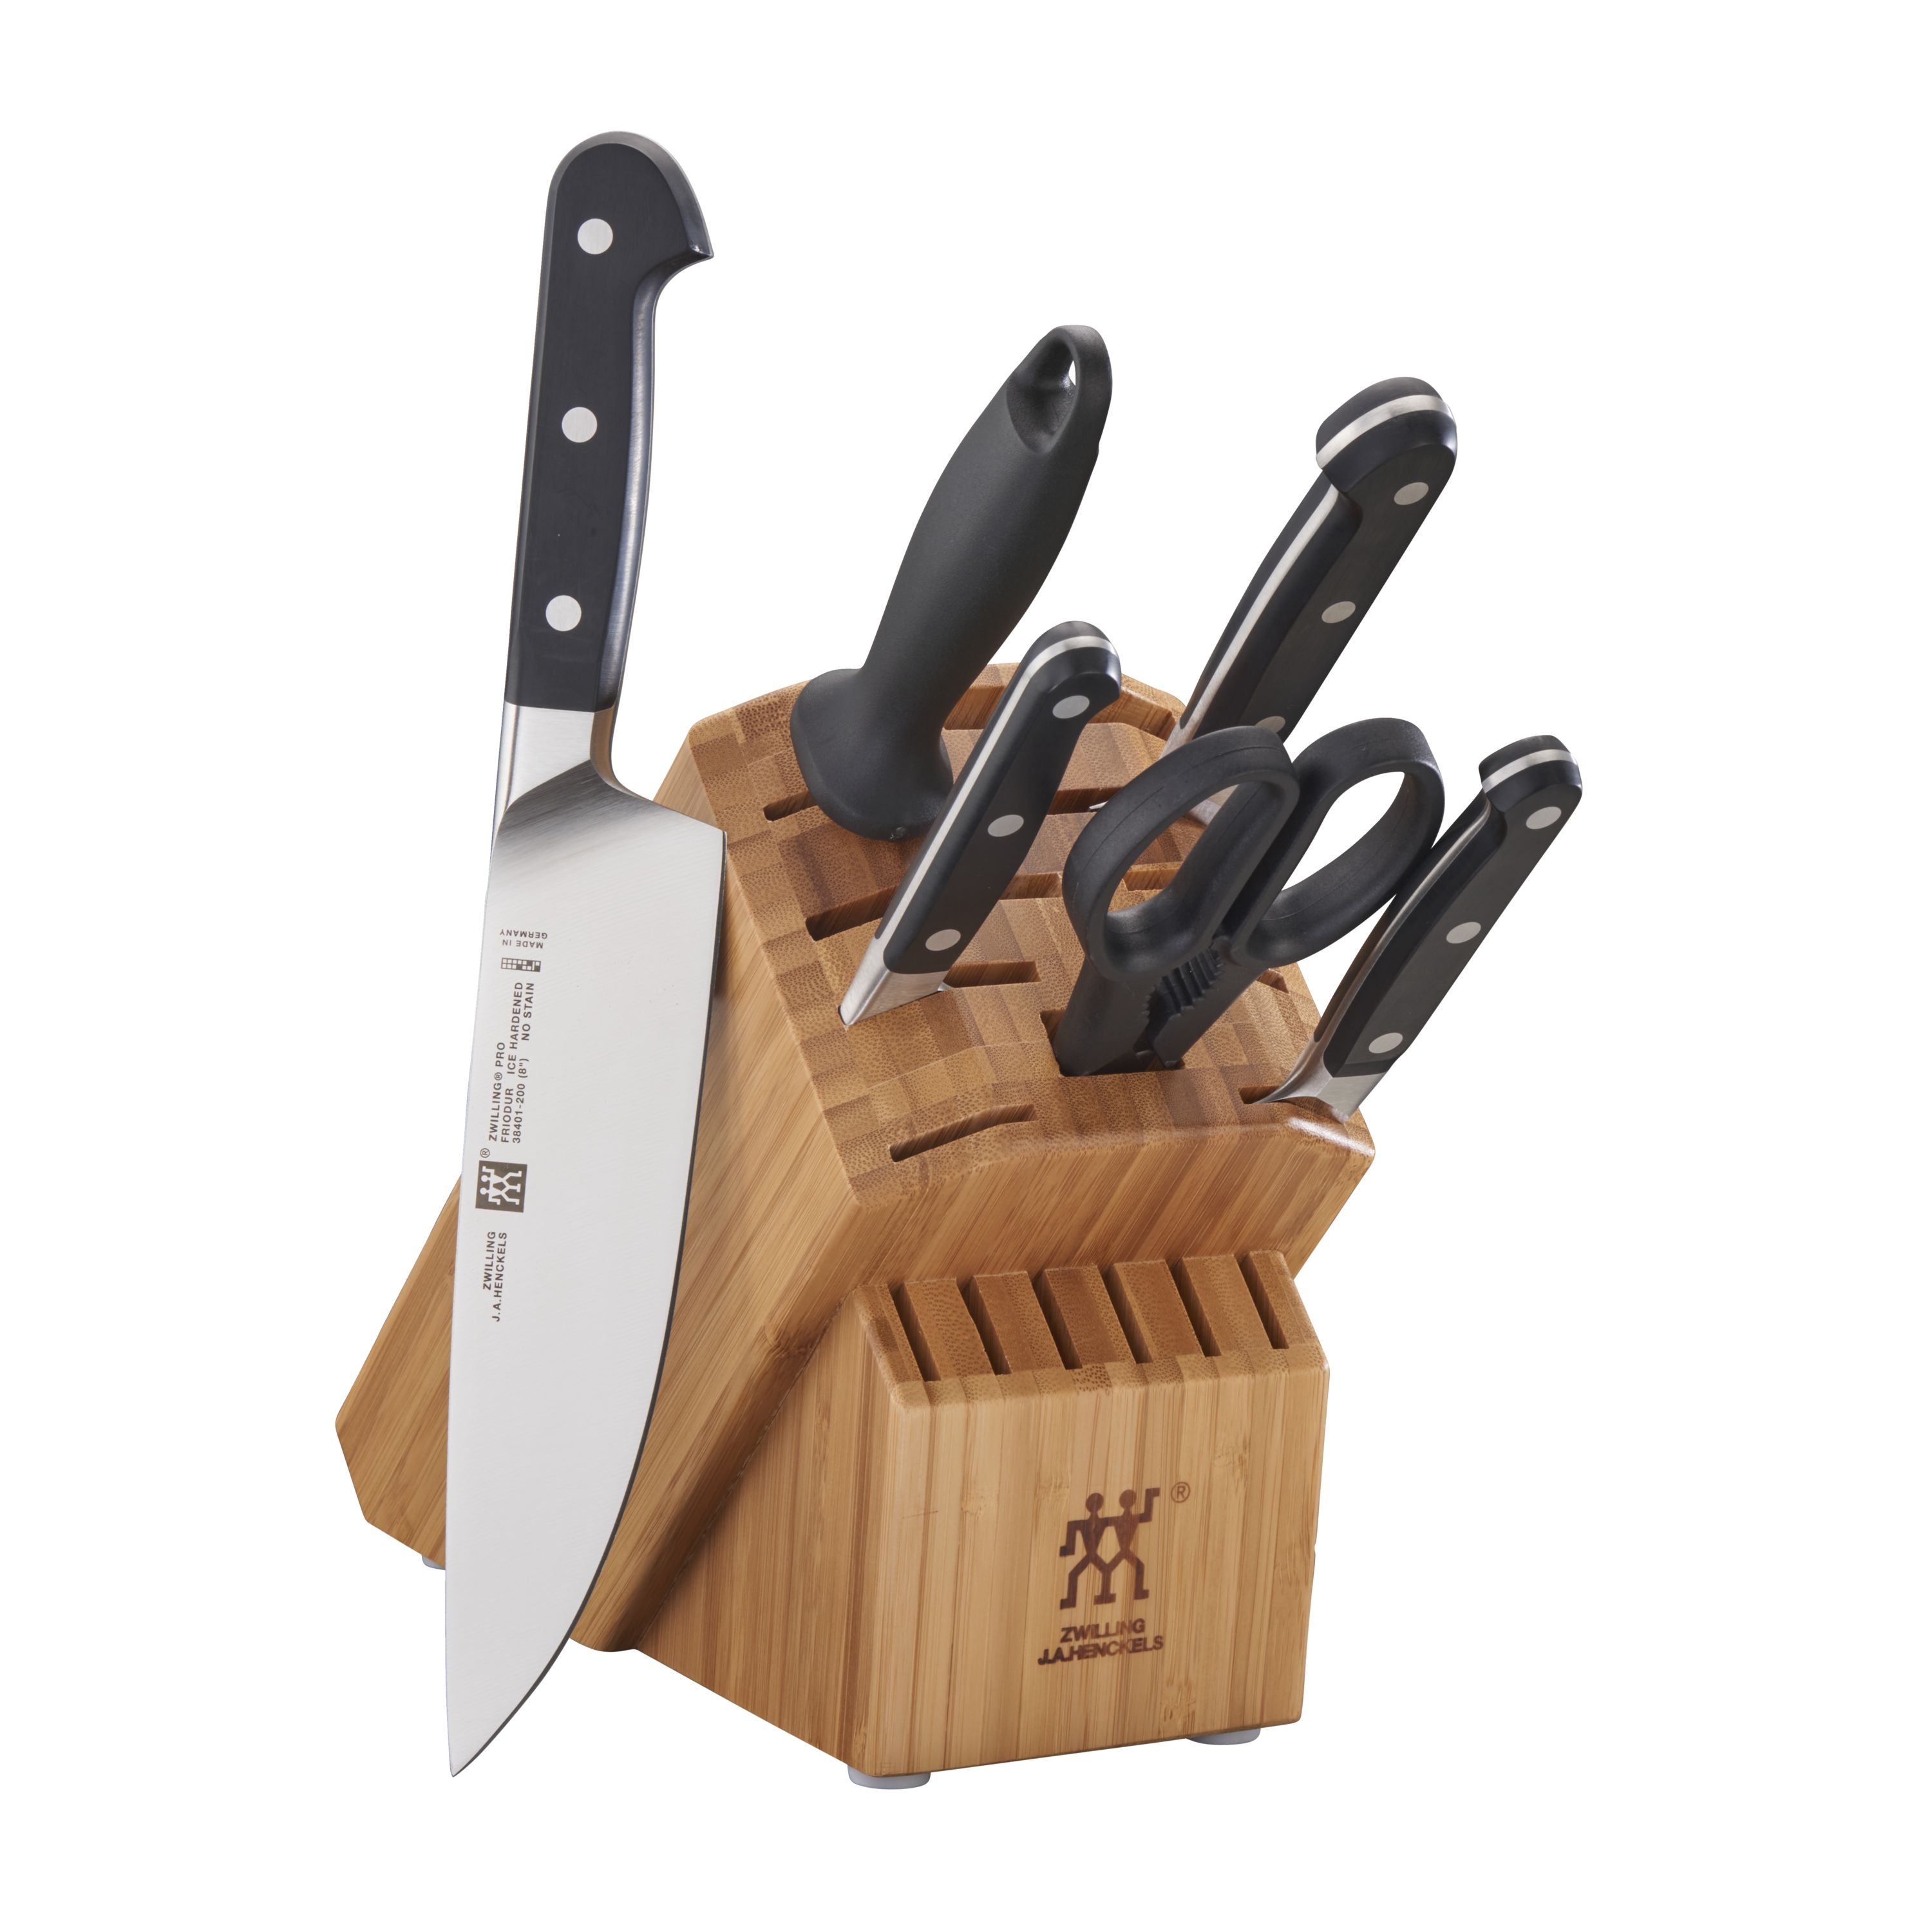  Knife Set, Kitchen Non Stick Knives Set with Block Thick Blade  Cutlery Knife Block Sets with Sharpener 6pcs Steak Knife Shears Chef Sharp  Quality Aluminum Alloy Block Blue Handle and Blade